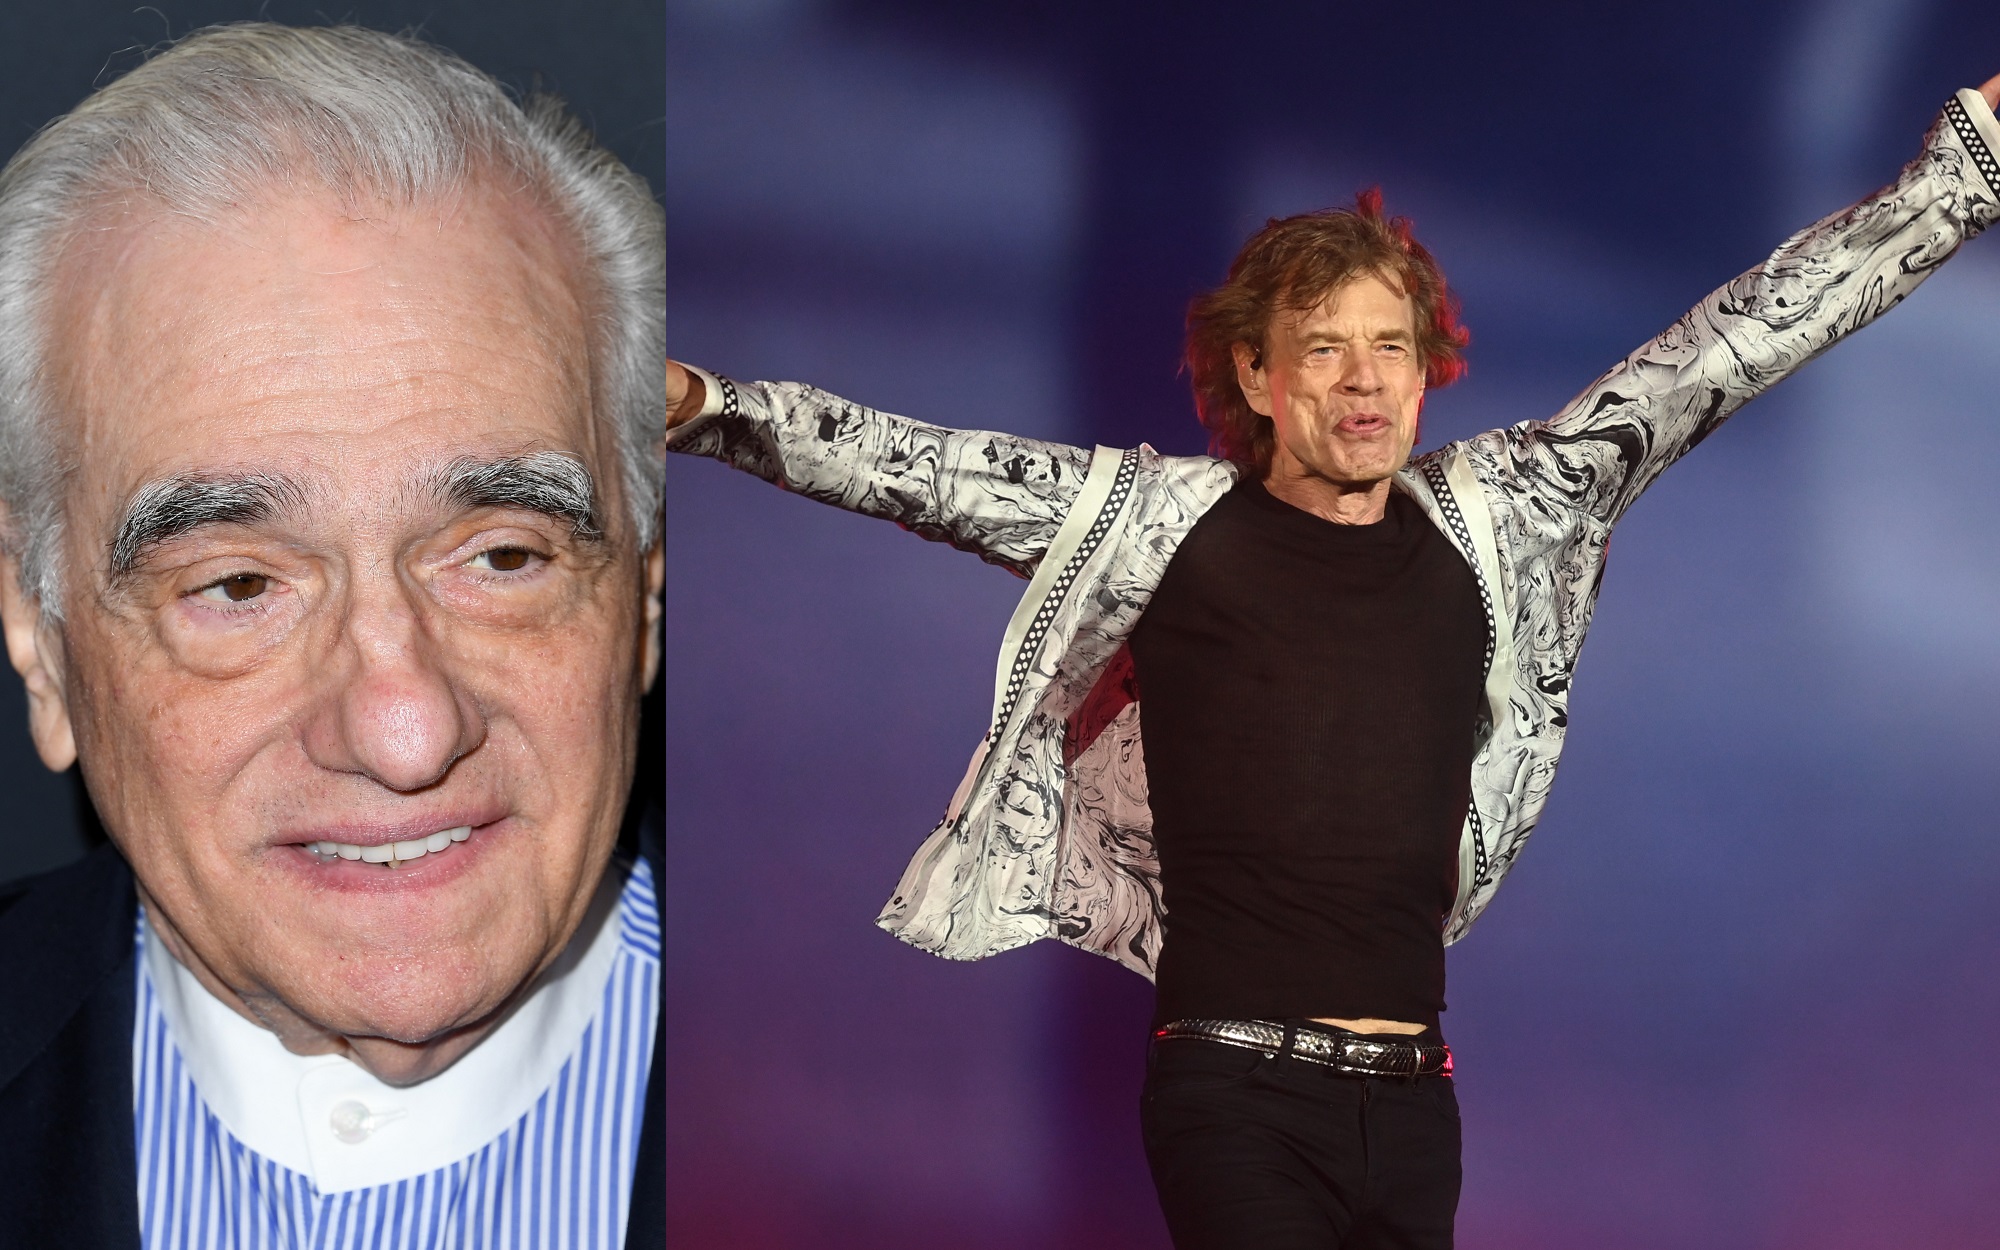 Martin Scorsese Used ‘Gimme Shelter’ in So Many of His Movies That Mick Jagger Noticed